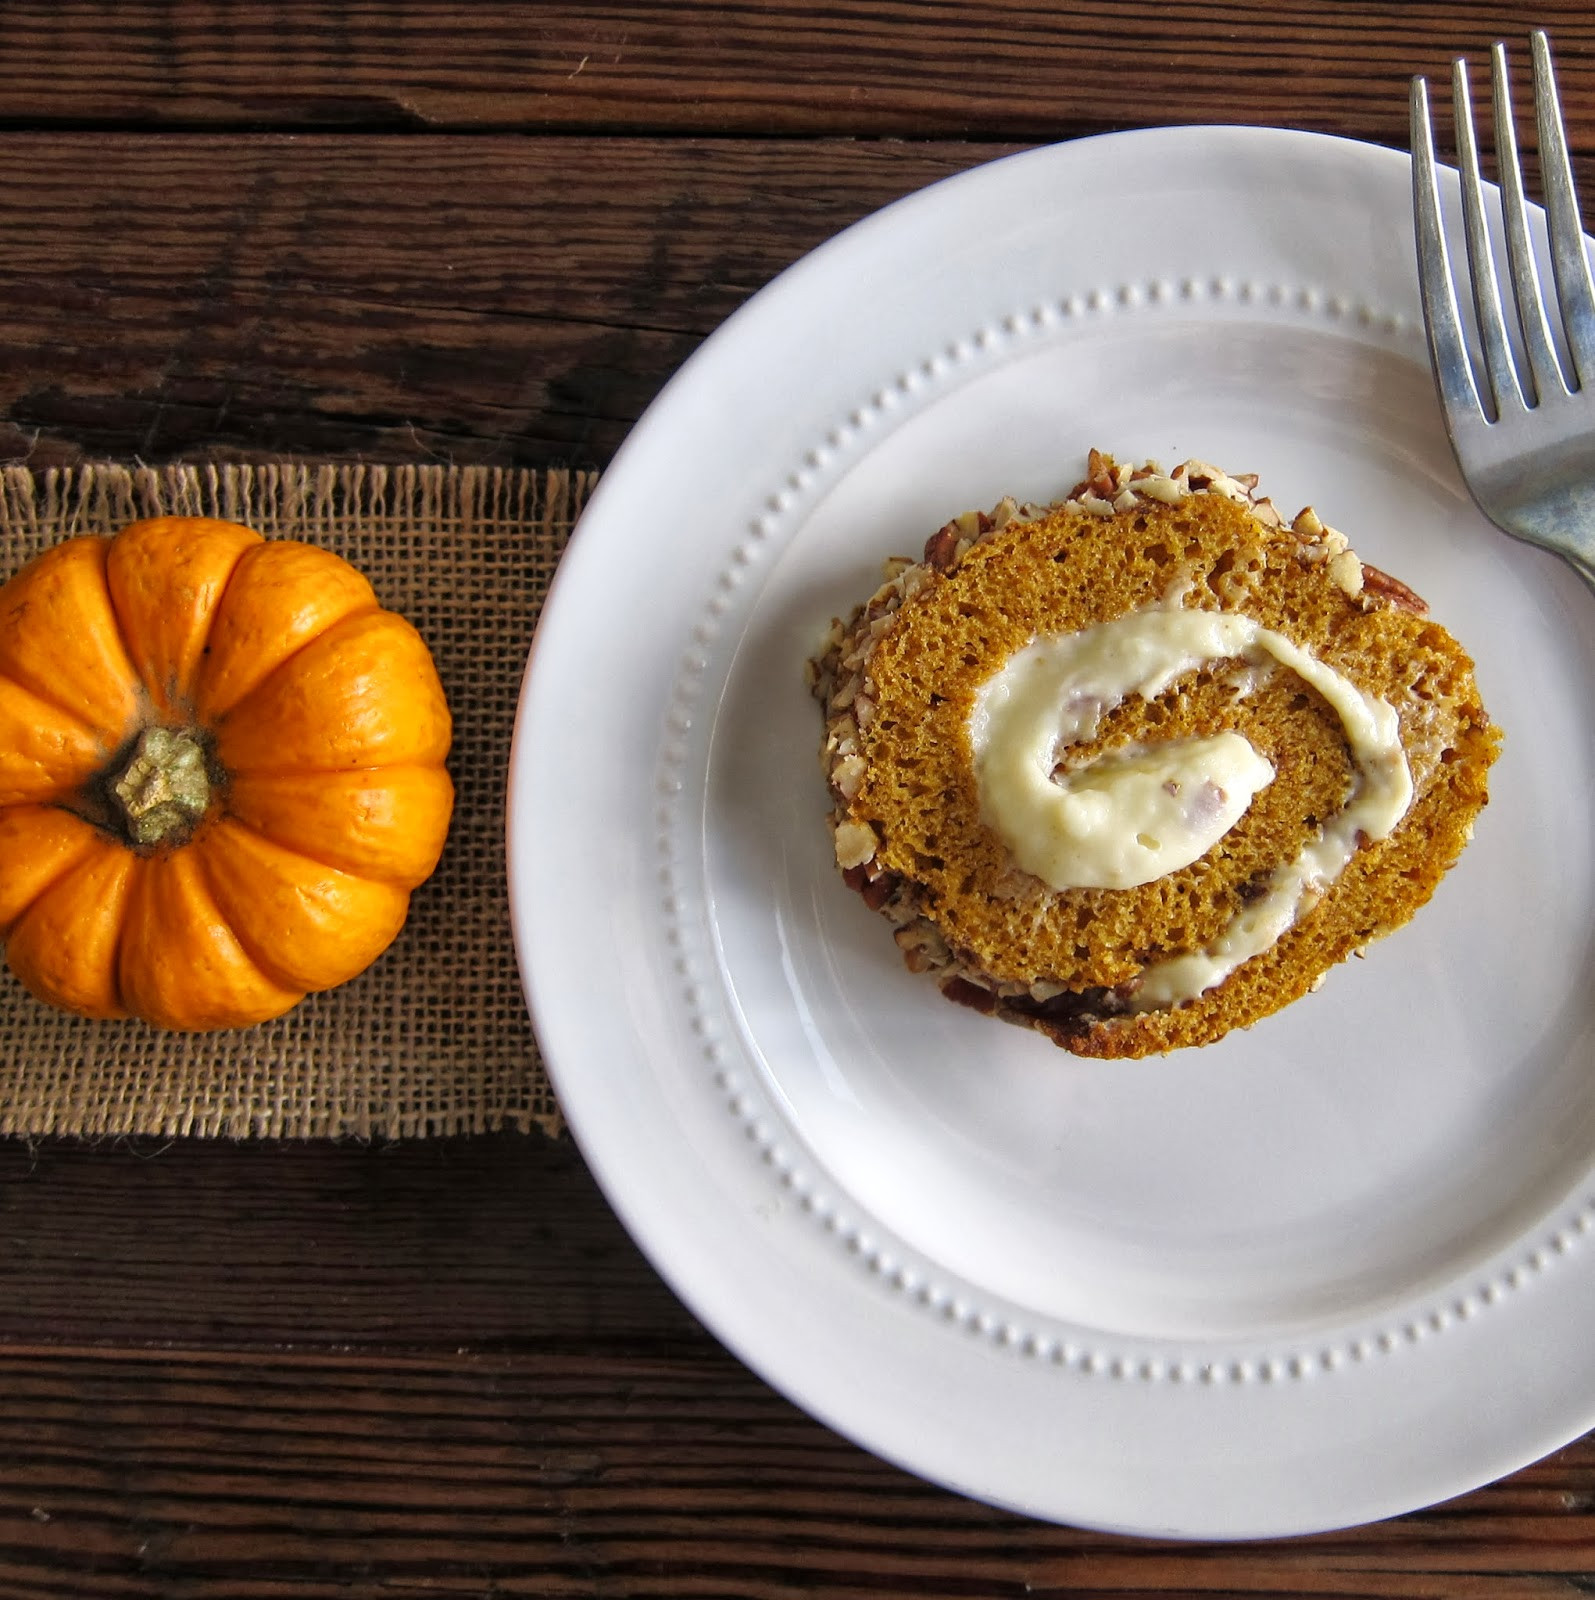 Pumpkin Roll Recipes With Cream Cheese Filling
 this is happiness Pumpkin Roll Recipe with Cream Cheese